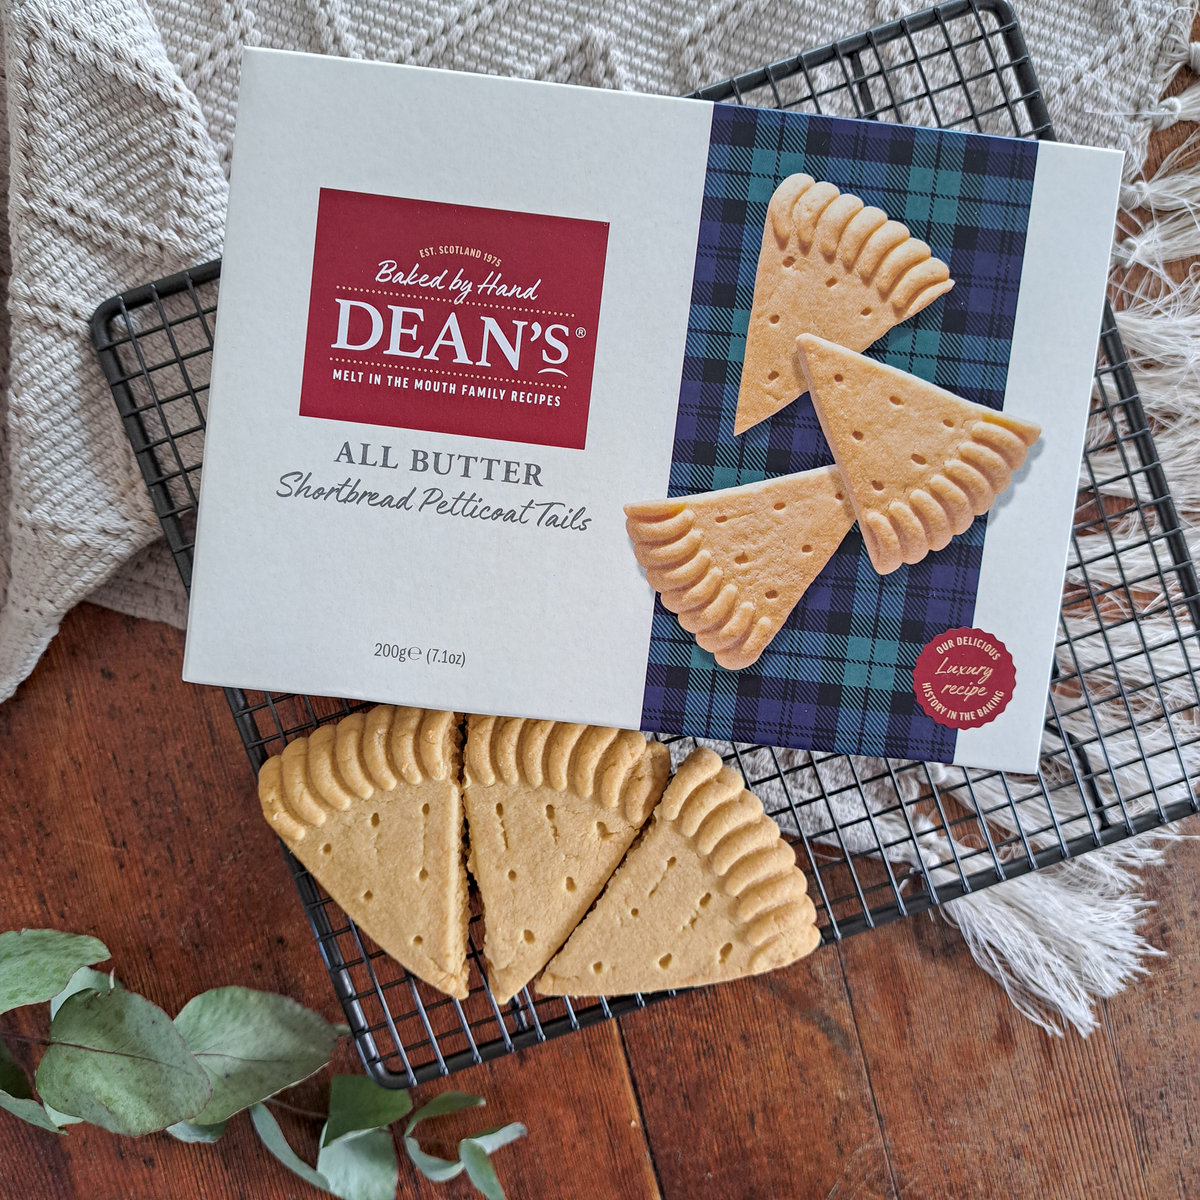 Buy the All Butter Shortbread Petticoat Tails 200g online at Dean's of Huntly Ltd